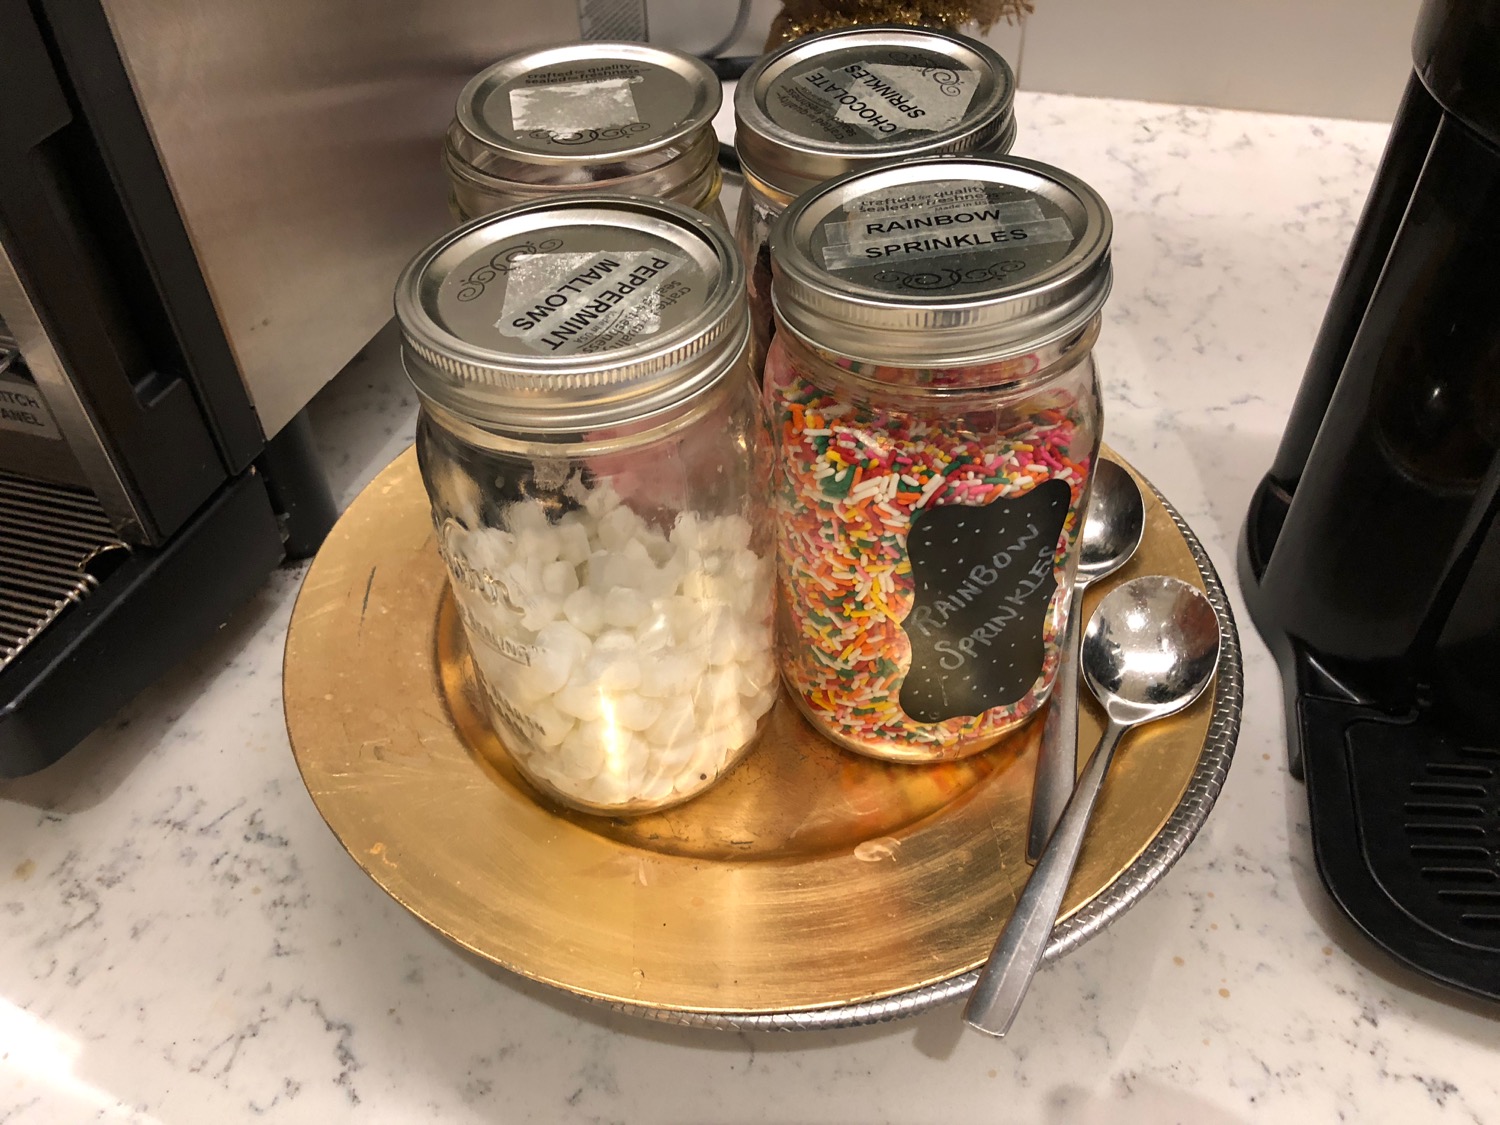 a group of jars with sprinkles on a plate